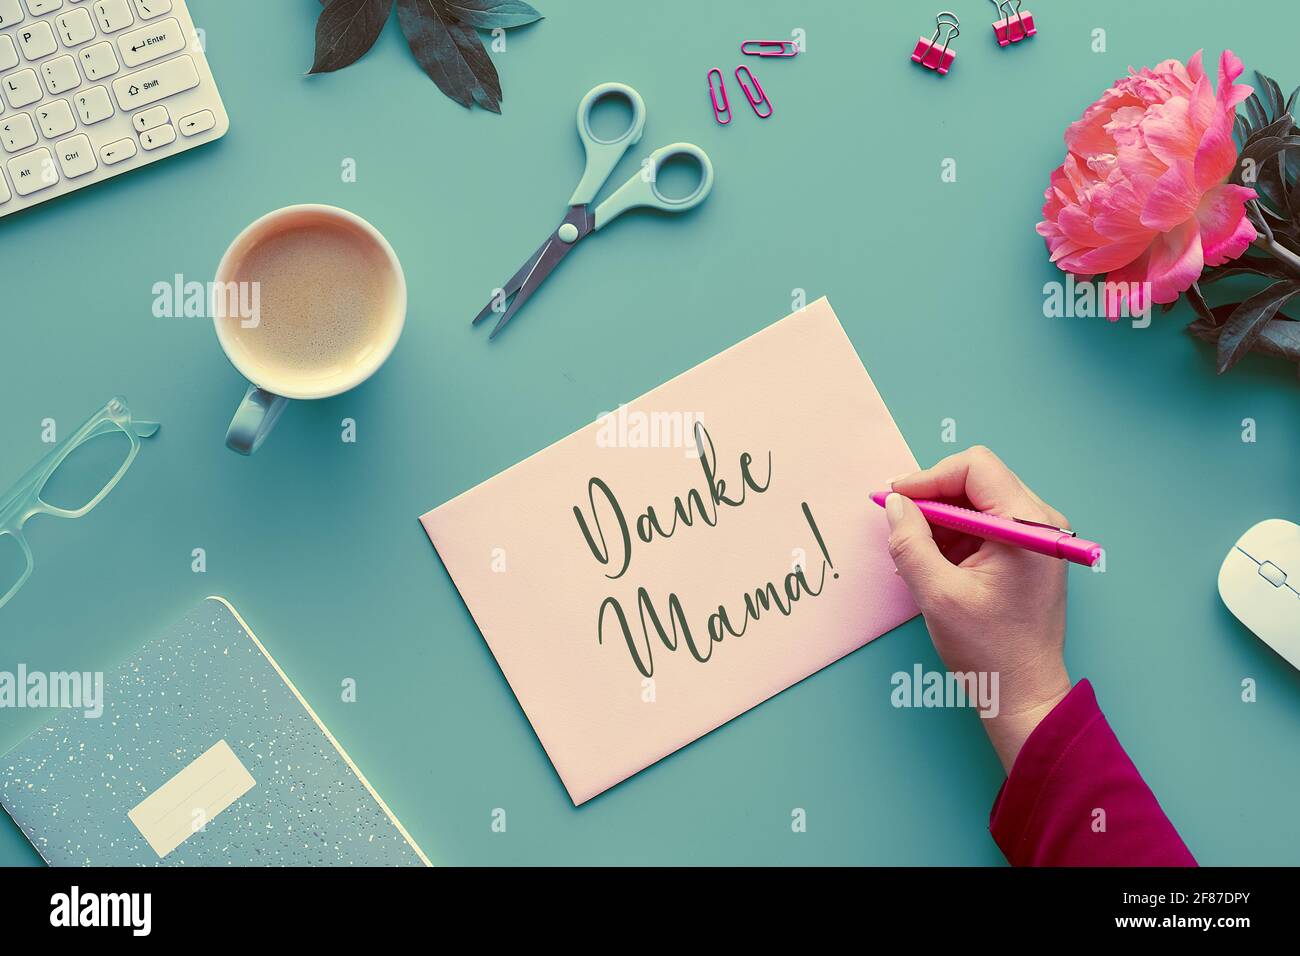 Mothers day greeting card. Text Danke Mama means thank you mom in German. Pink peony flowers on faded mint green table. Coffee, keyboard, flowers Stock Photo